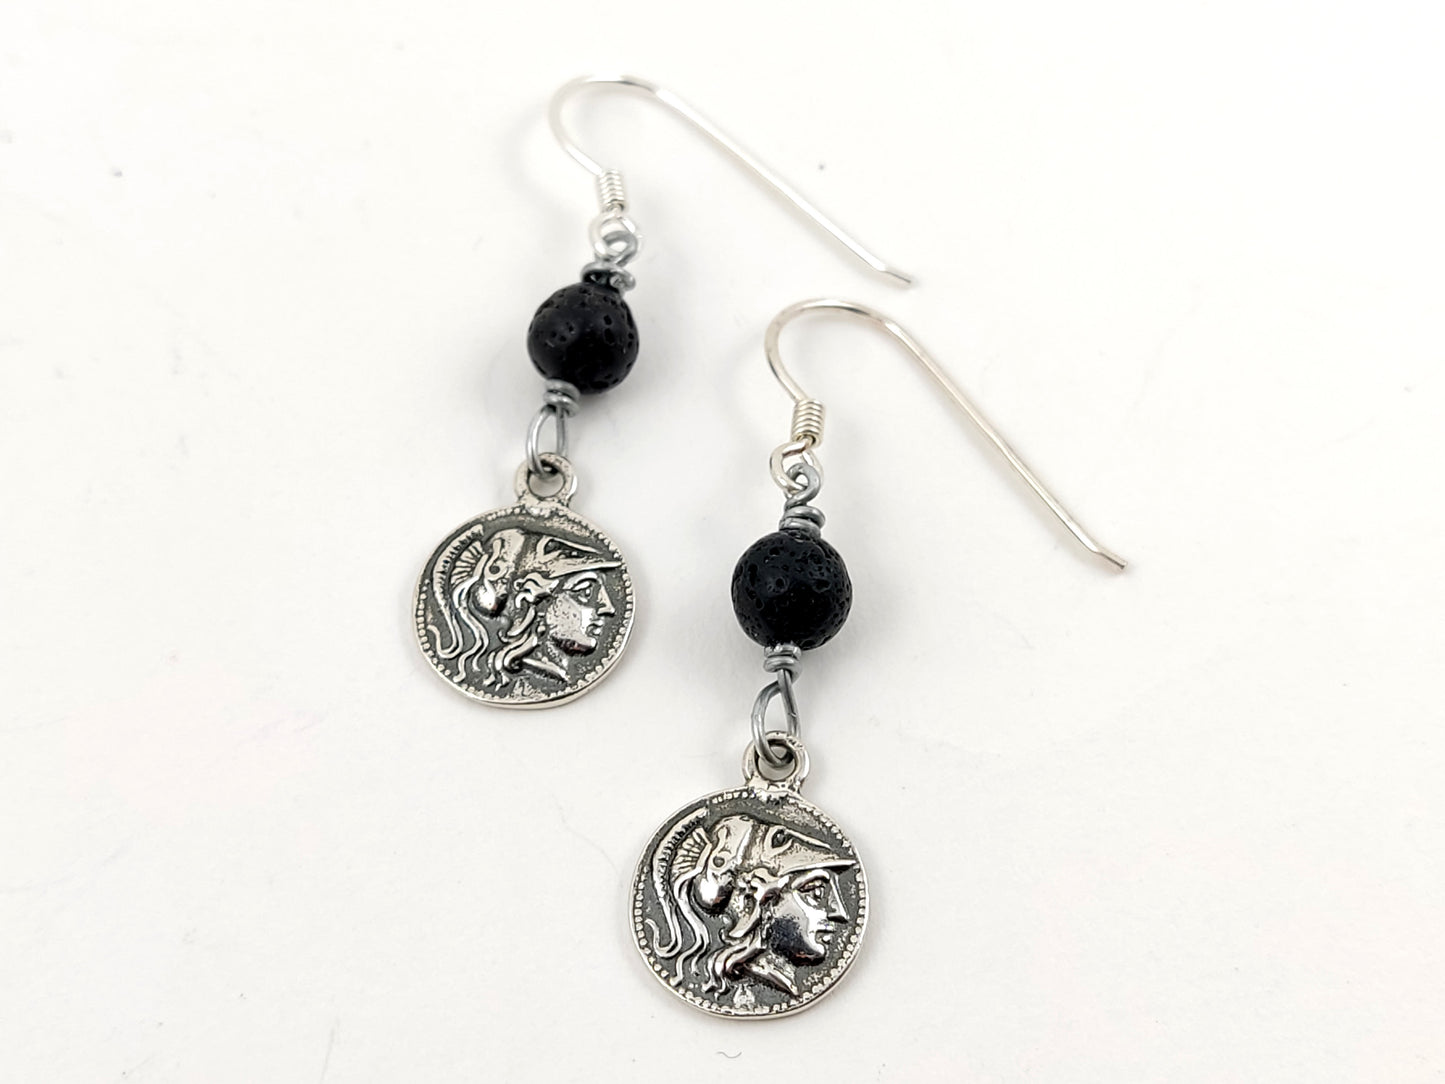 Silver and lava stones earrings depicting Athena on white background.